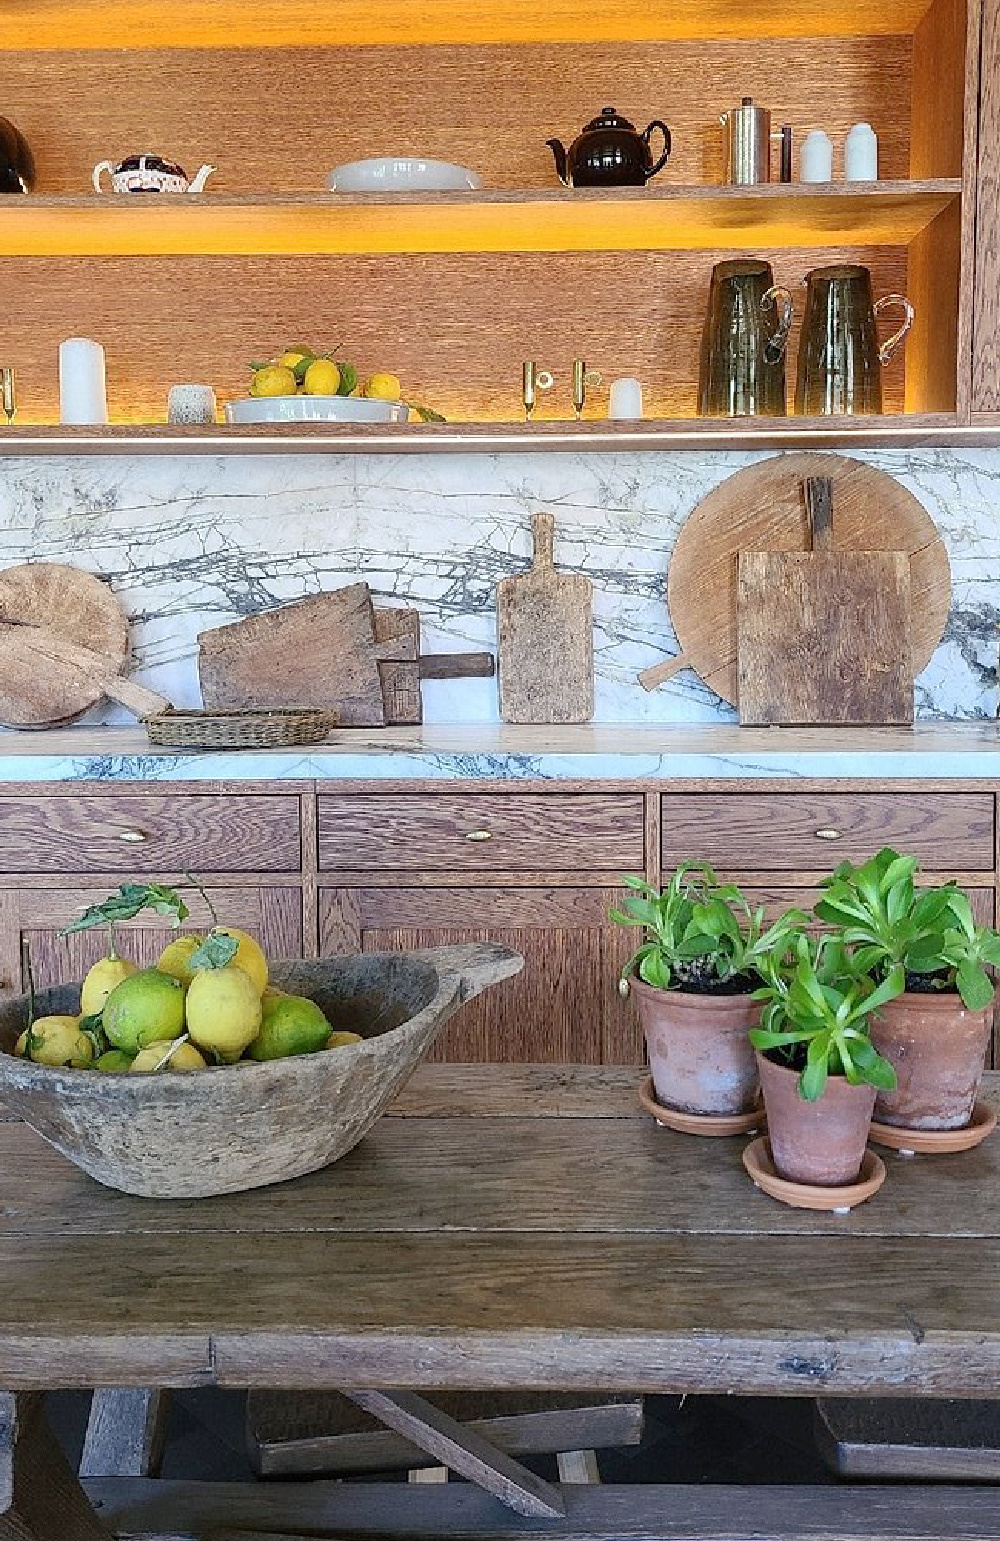 Rustic wood bar and marble shelves at Heckfield Place (Hampsire, England), a cozy luxurious hotel on 400 acres of English countryside - design by Ben Thompson. #heckfieldplace #englishcountrystyle